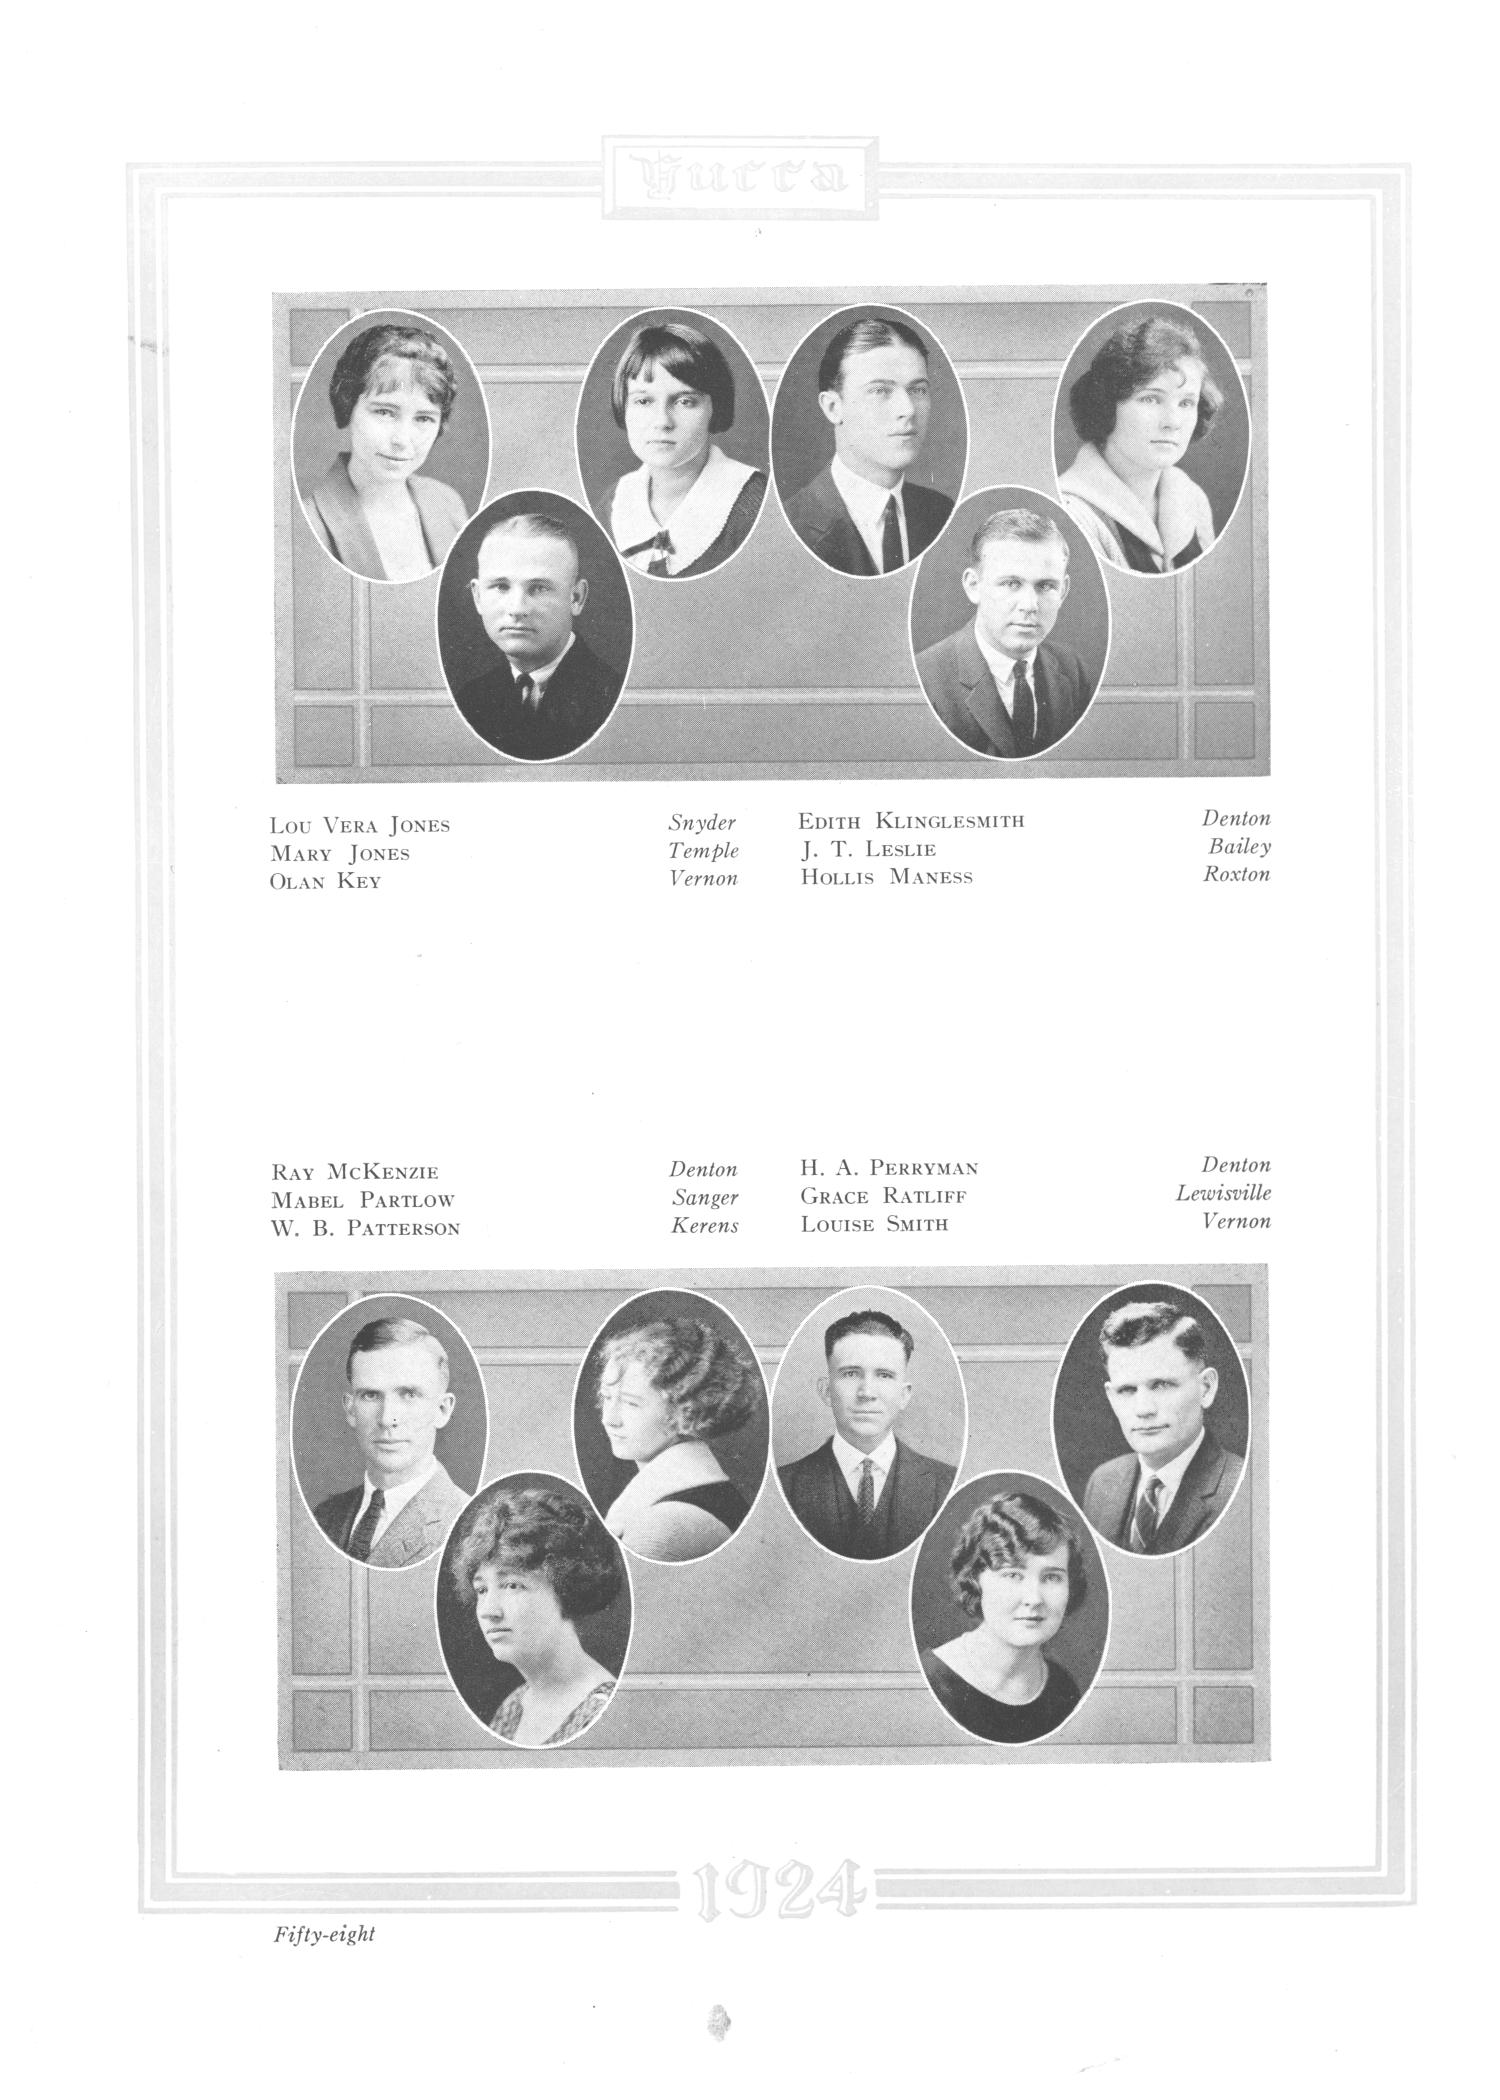 The Yucca, Yearbook of North Texas State Teacher's School, 1924
                                                
                                                    58
                                                